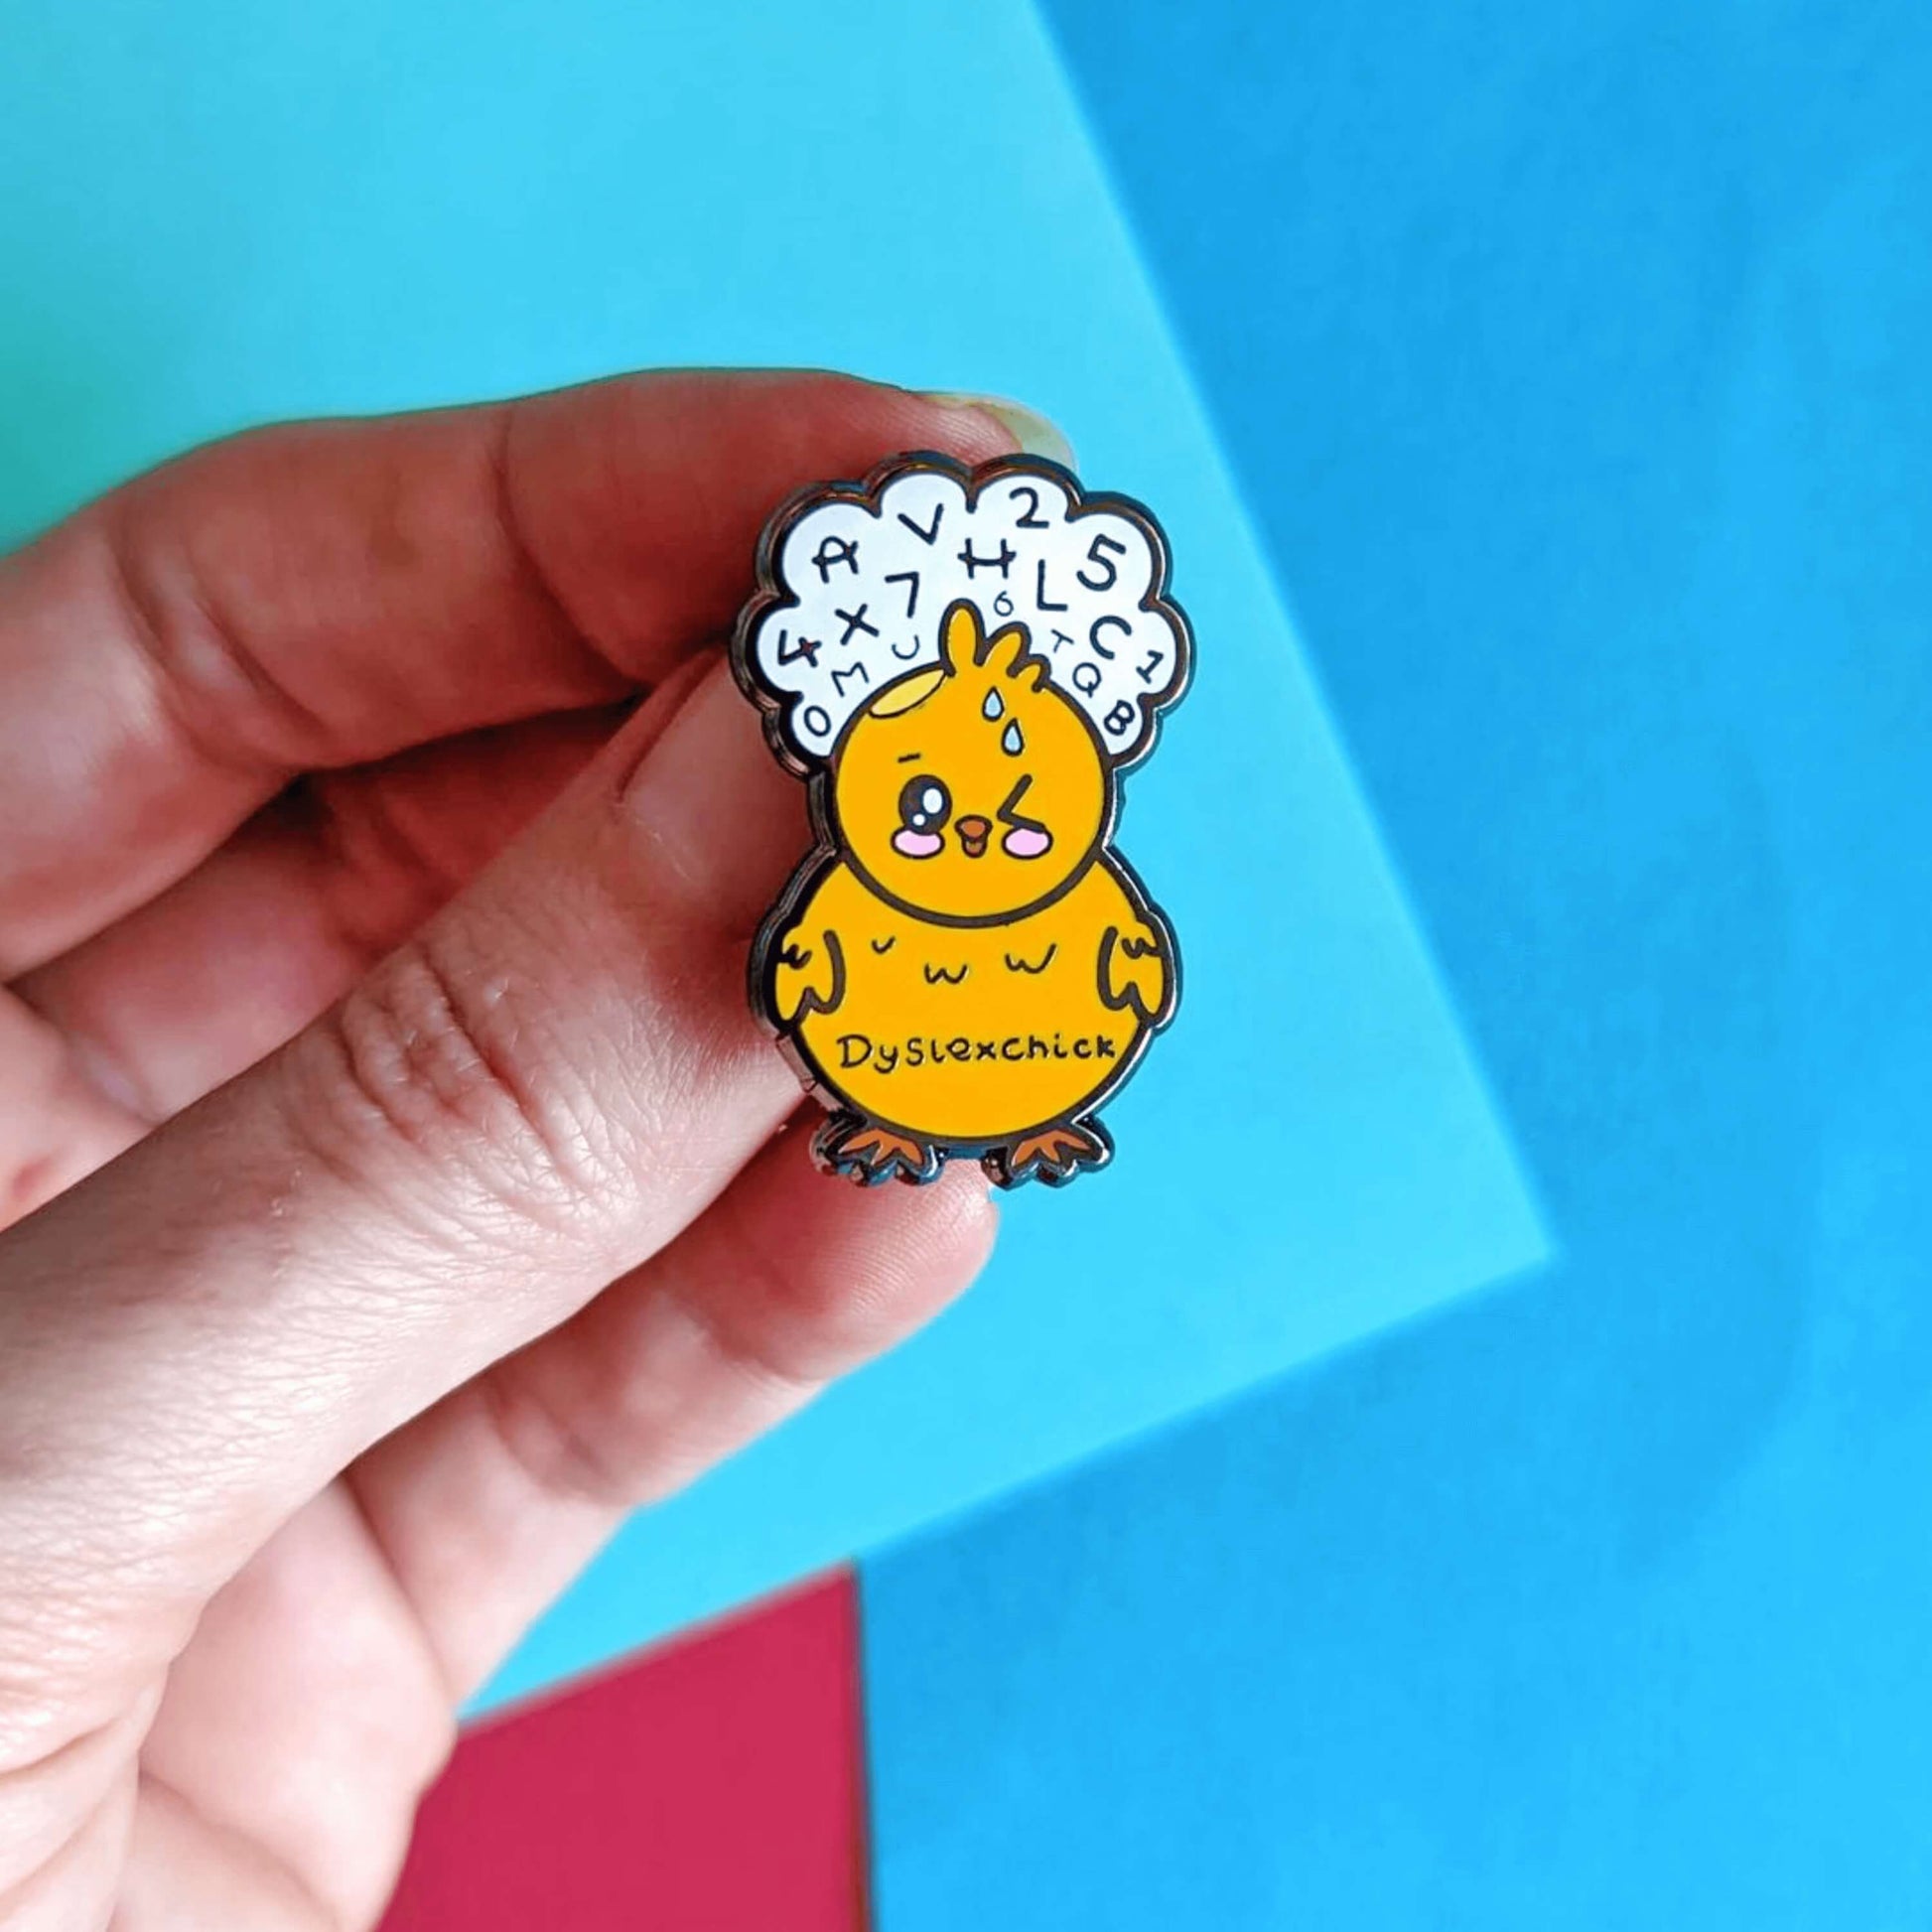 A cute yellow chick enamel pin with one eye closed shut and rosy cheeks. The chick has an orange beak and feet and a fluffy belly. There is a white cloud above the chicks head with various letters and numbers in. The chick also has sweat droplets on its forehead. 'Dyslexchick' is written across the chicks tummy in black. The pin is being held by a hand in front of a red and blue background. Design is raising awareness for dyslexia.